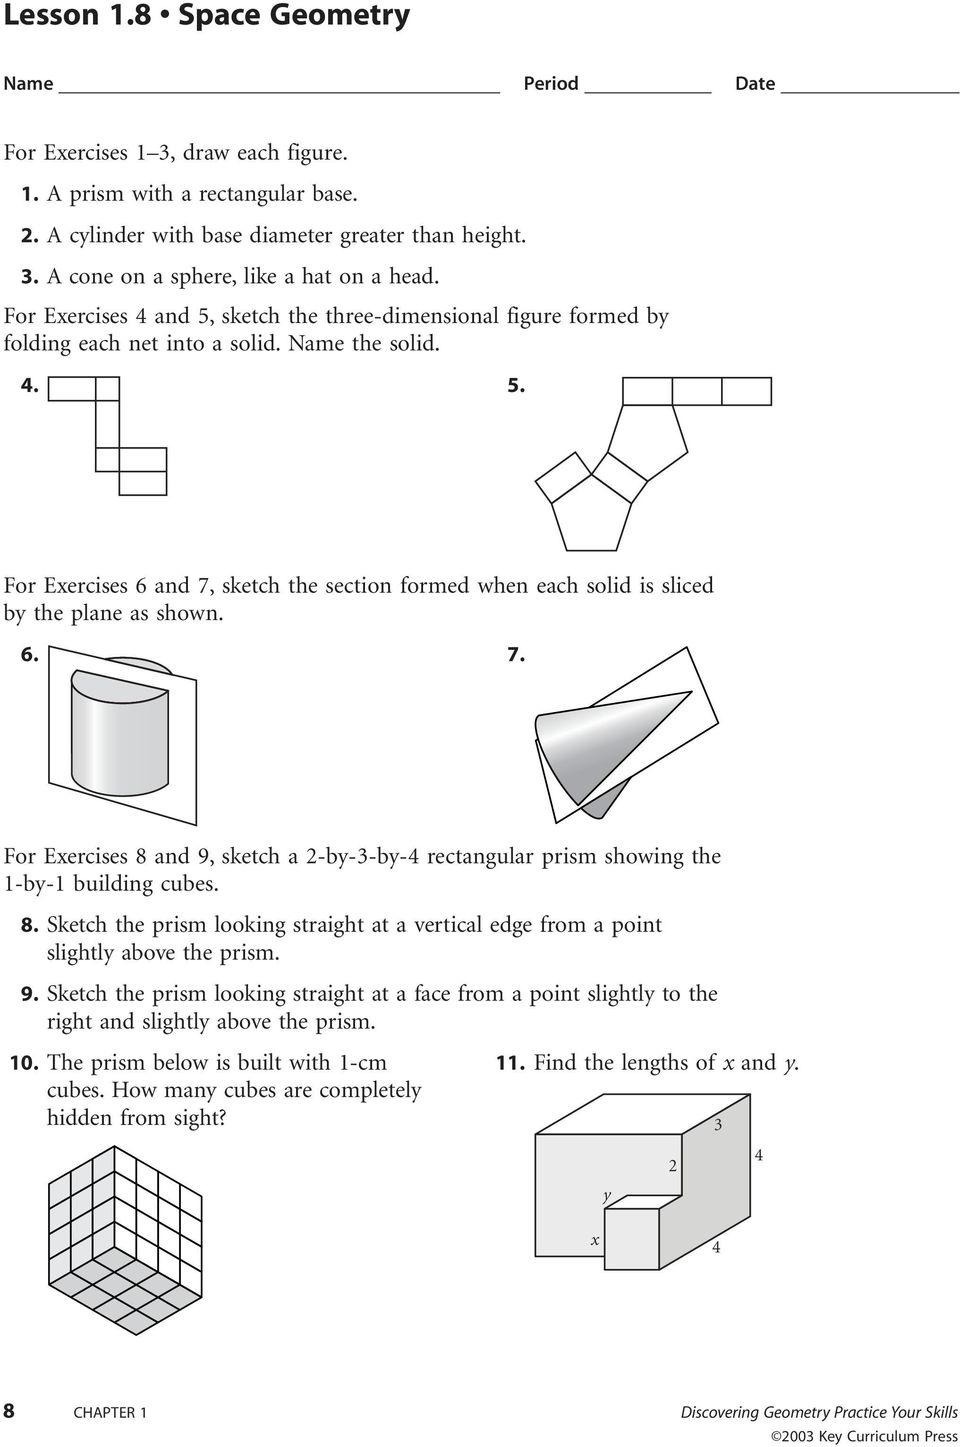 6. 7. For Exercises 8 and 9, sketch a 2-by-3-by-4 rectangular prism showing the 1-by-1 building cubes. 8. Sketch the prism looking straight at a vertical edge from a point slightly above the prism. 9. Sketch the prism looking straight at a face from a point slightly to the right and slightly above the prism.